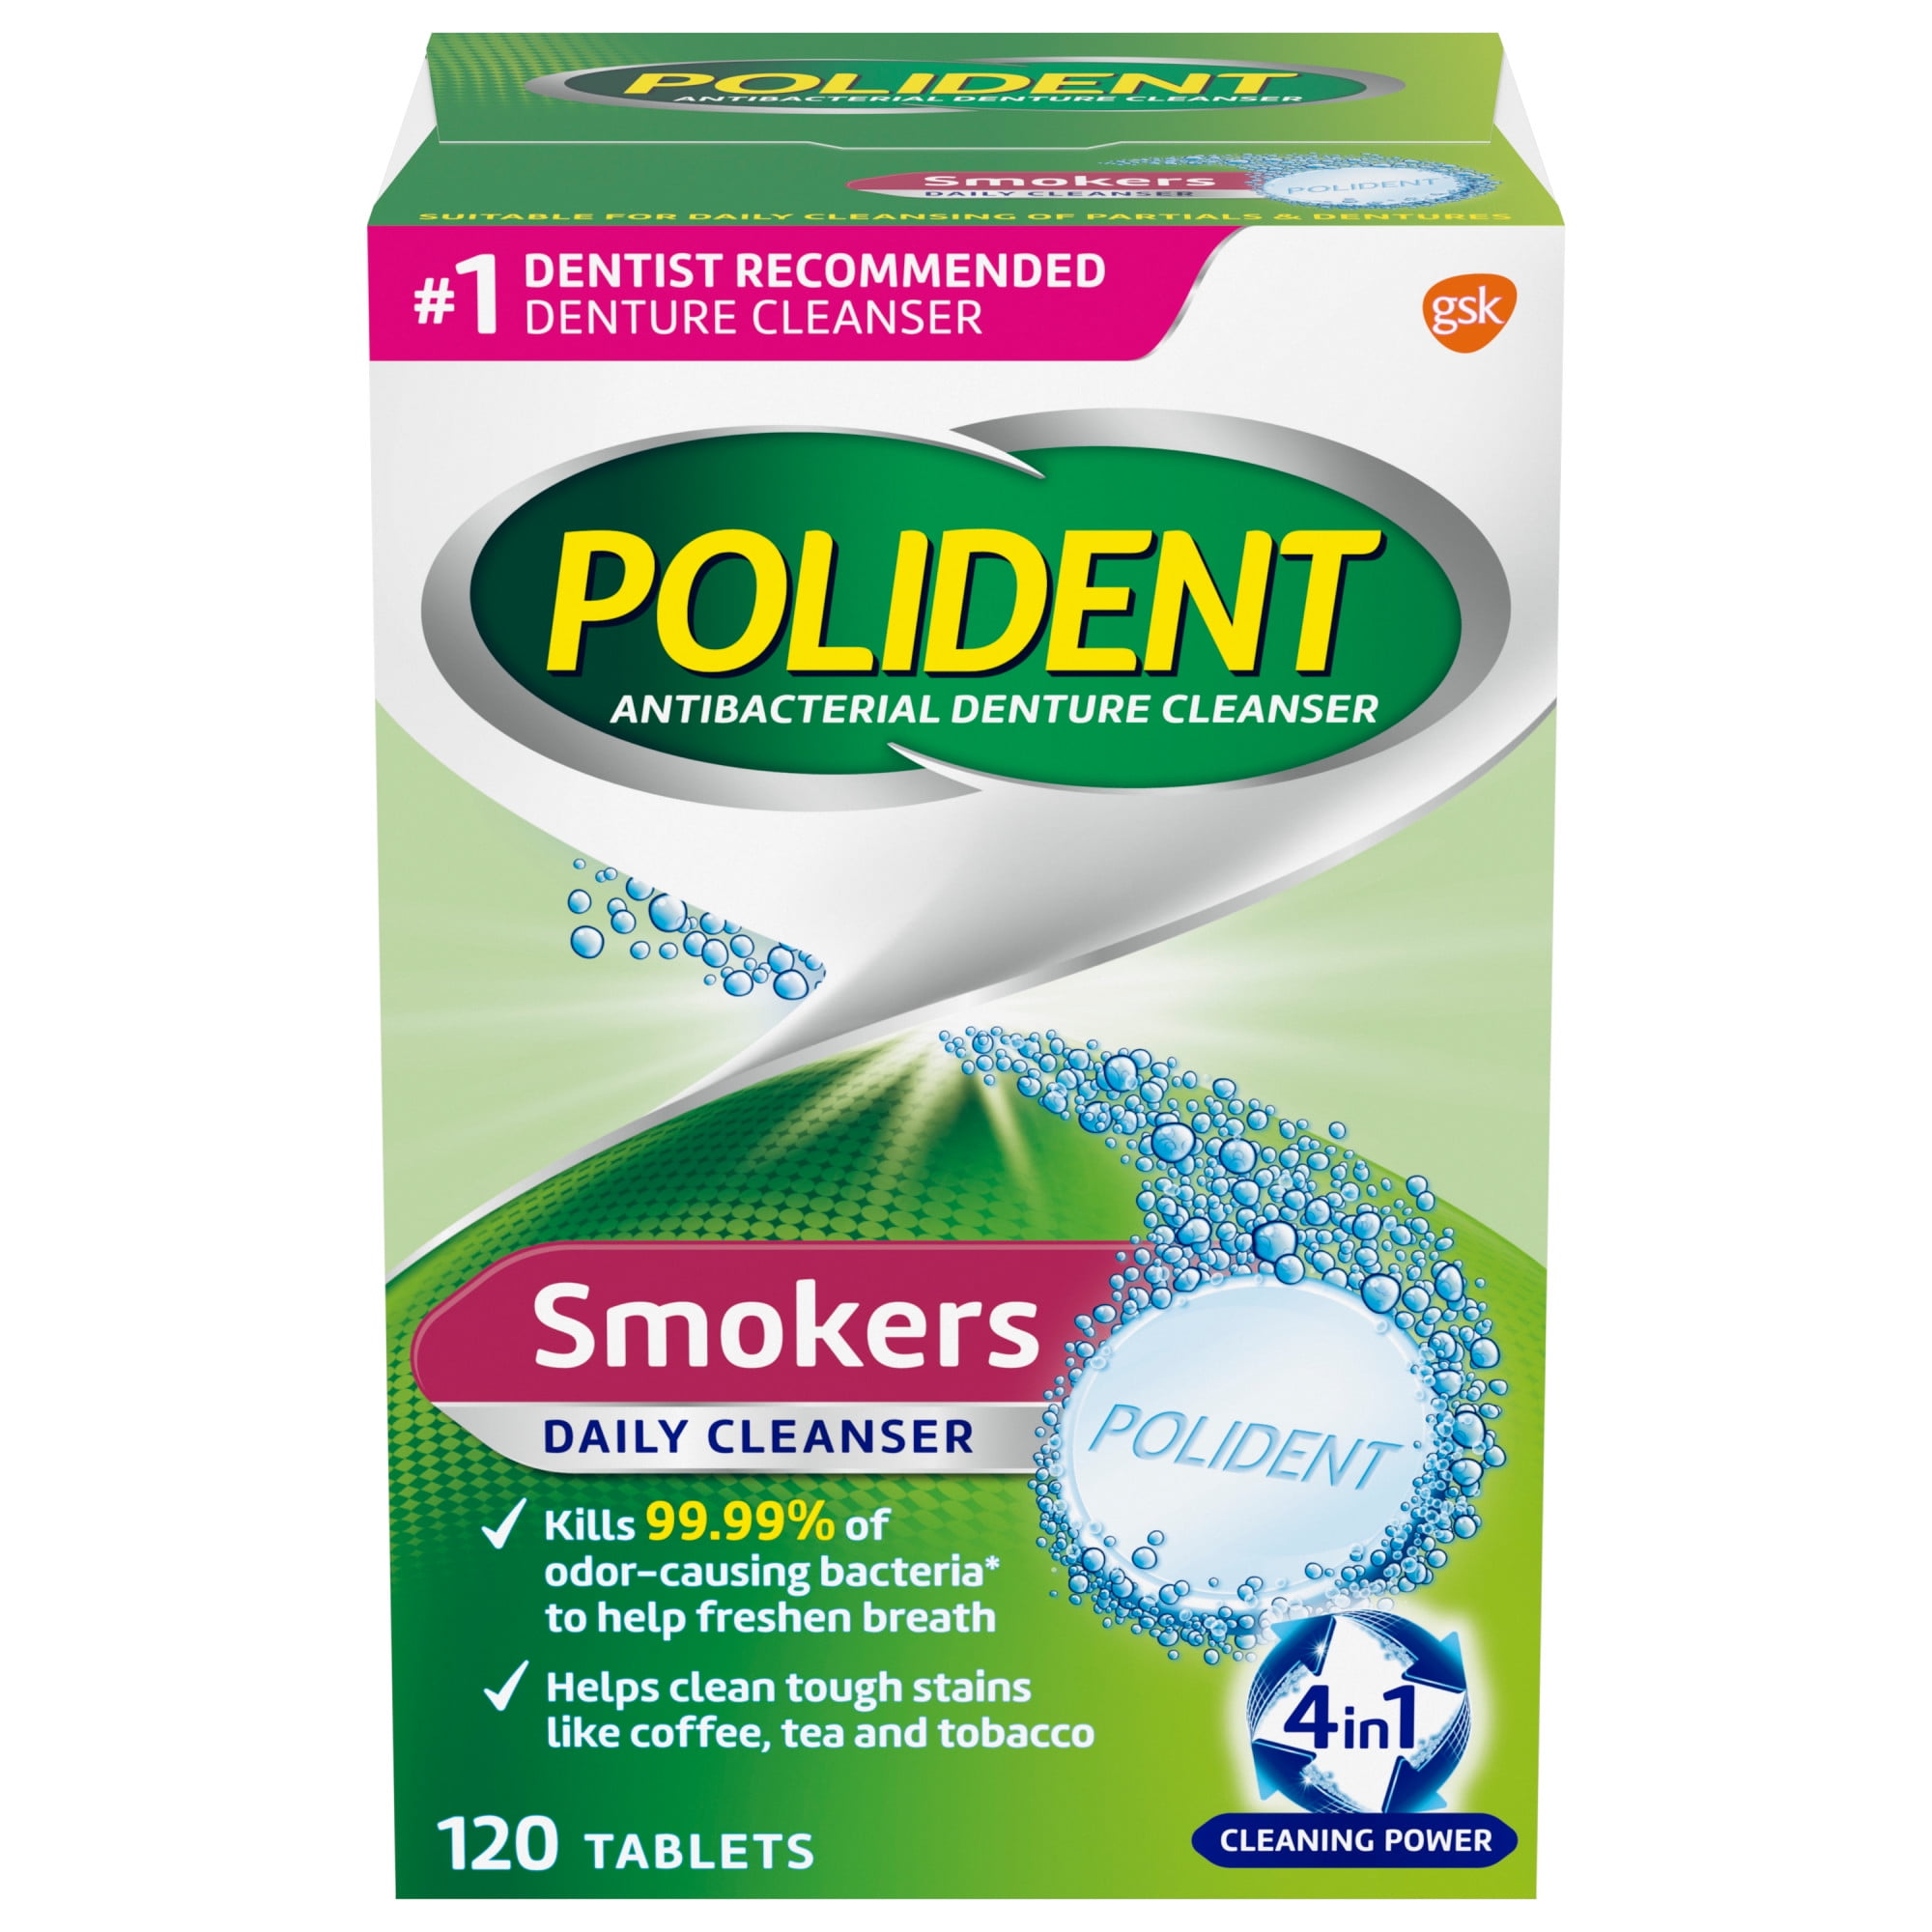 Polident Smokers Antibacterial Denture Cleanser Effervescent Tablets, 120 Count